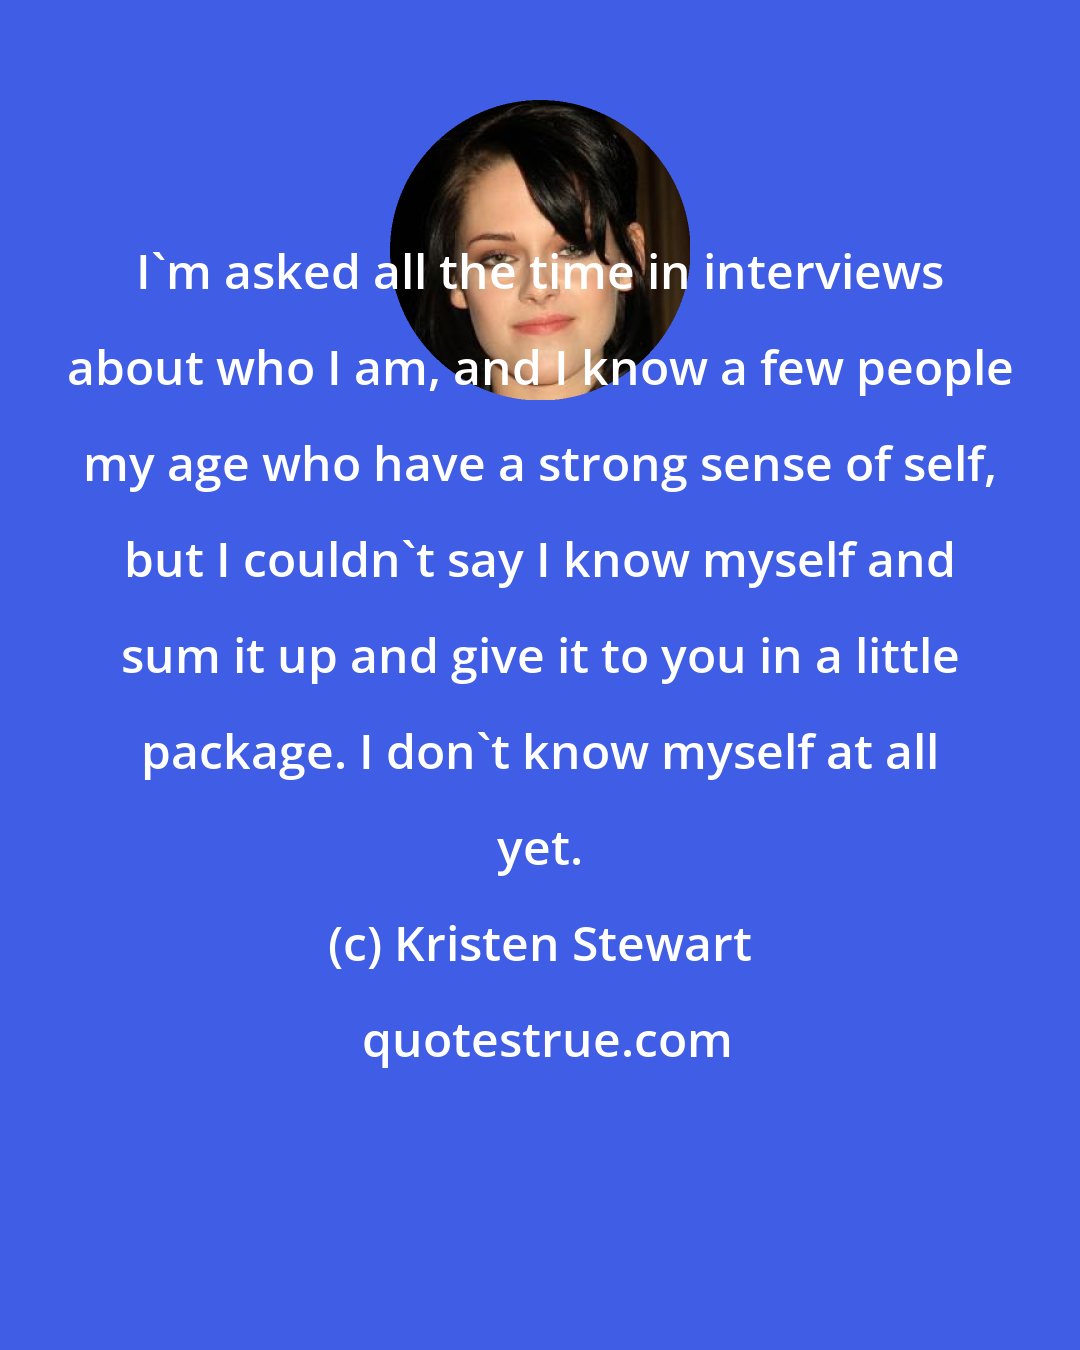 Kristen Stewart: I'm asked all the time in interviews about who I am, and I know a few people my age who have a strong sense of self, but I couldn't say I know myself and sum it up and give it to you in a little package. I don't know myself at all yet.